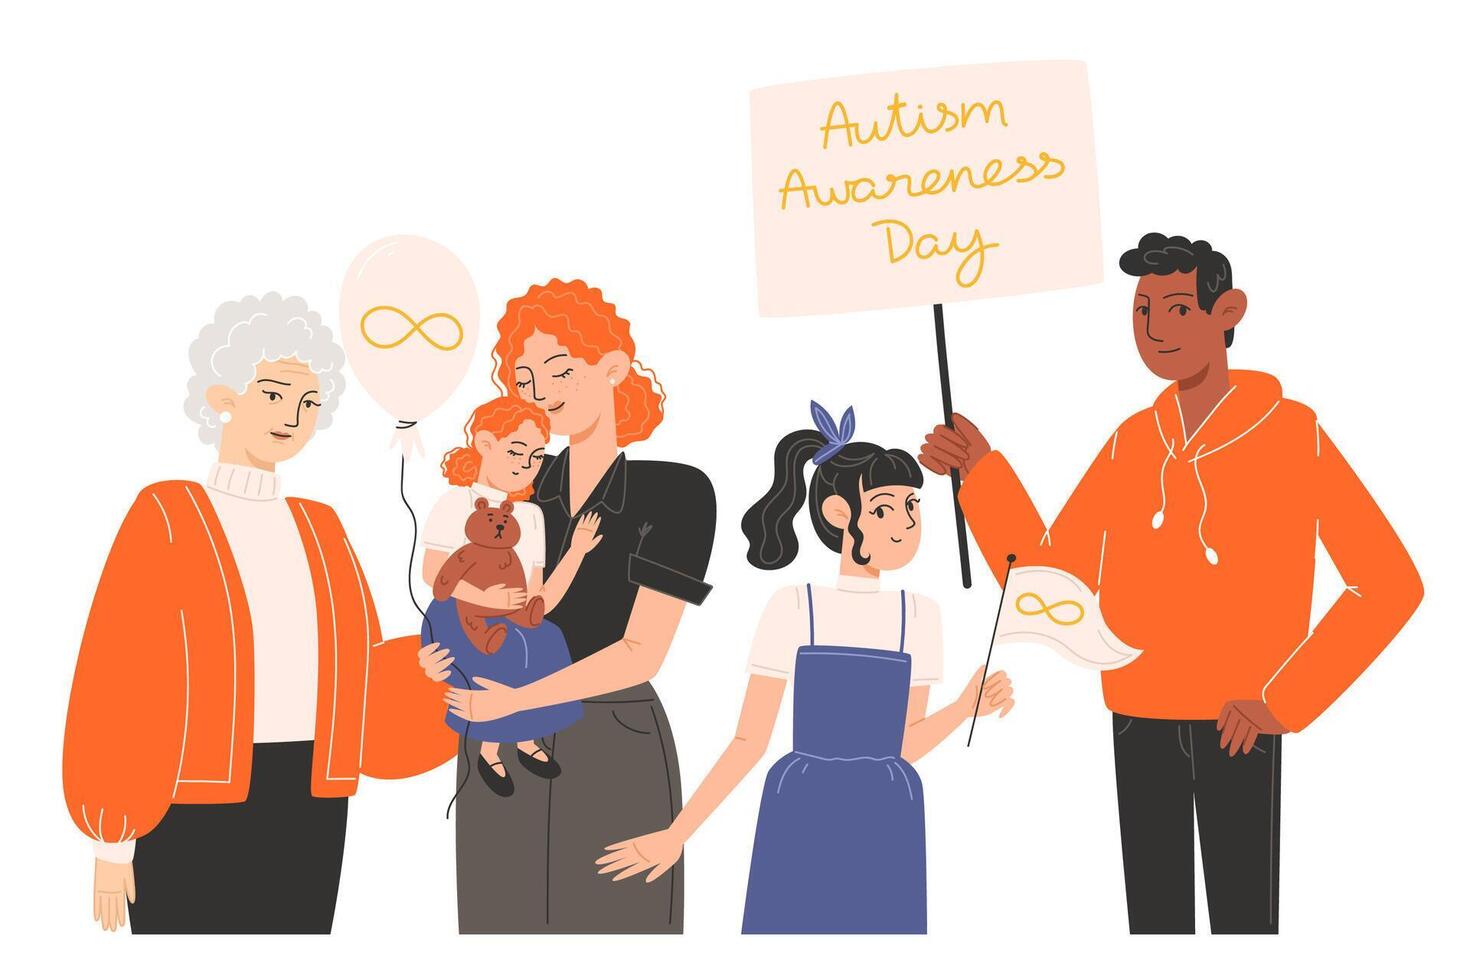 Group of people standing together with symbols of Autism Awareness Day vector